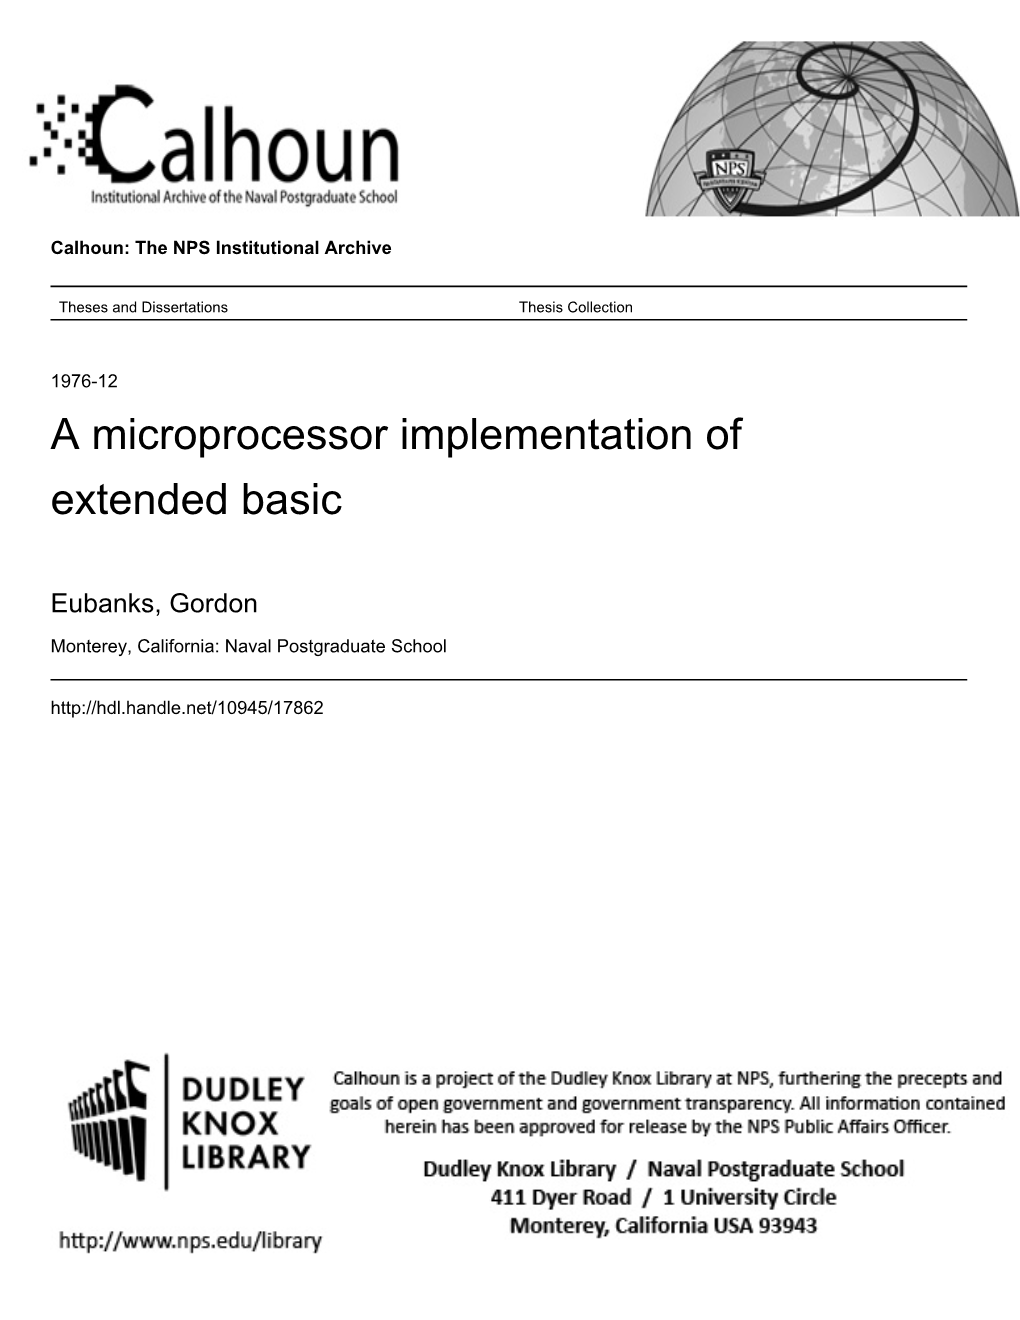 A Microprocessor Implementation of Extended Basic